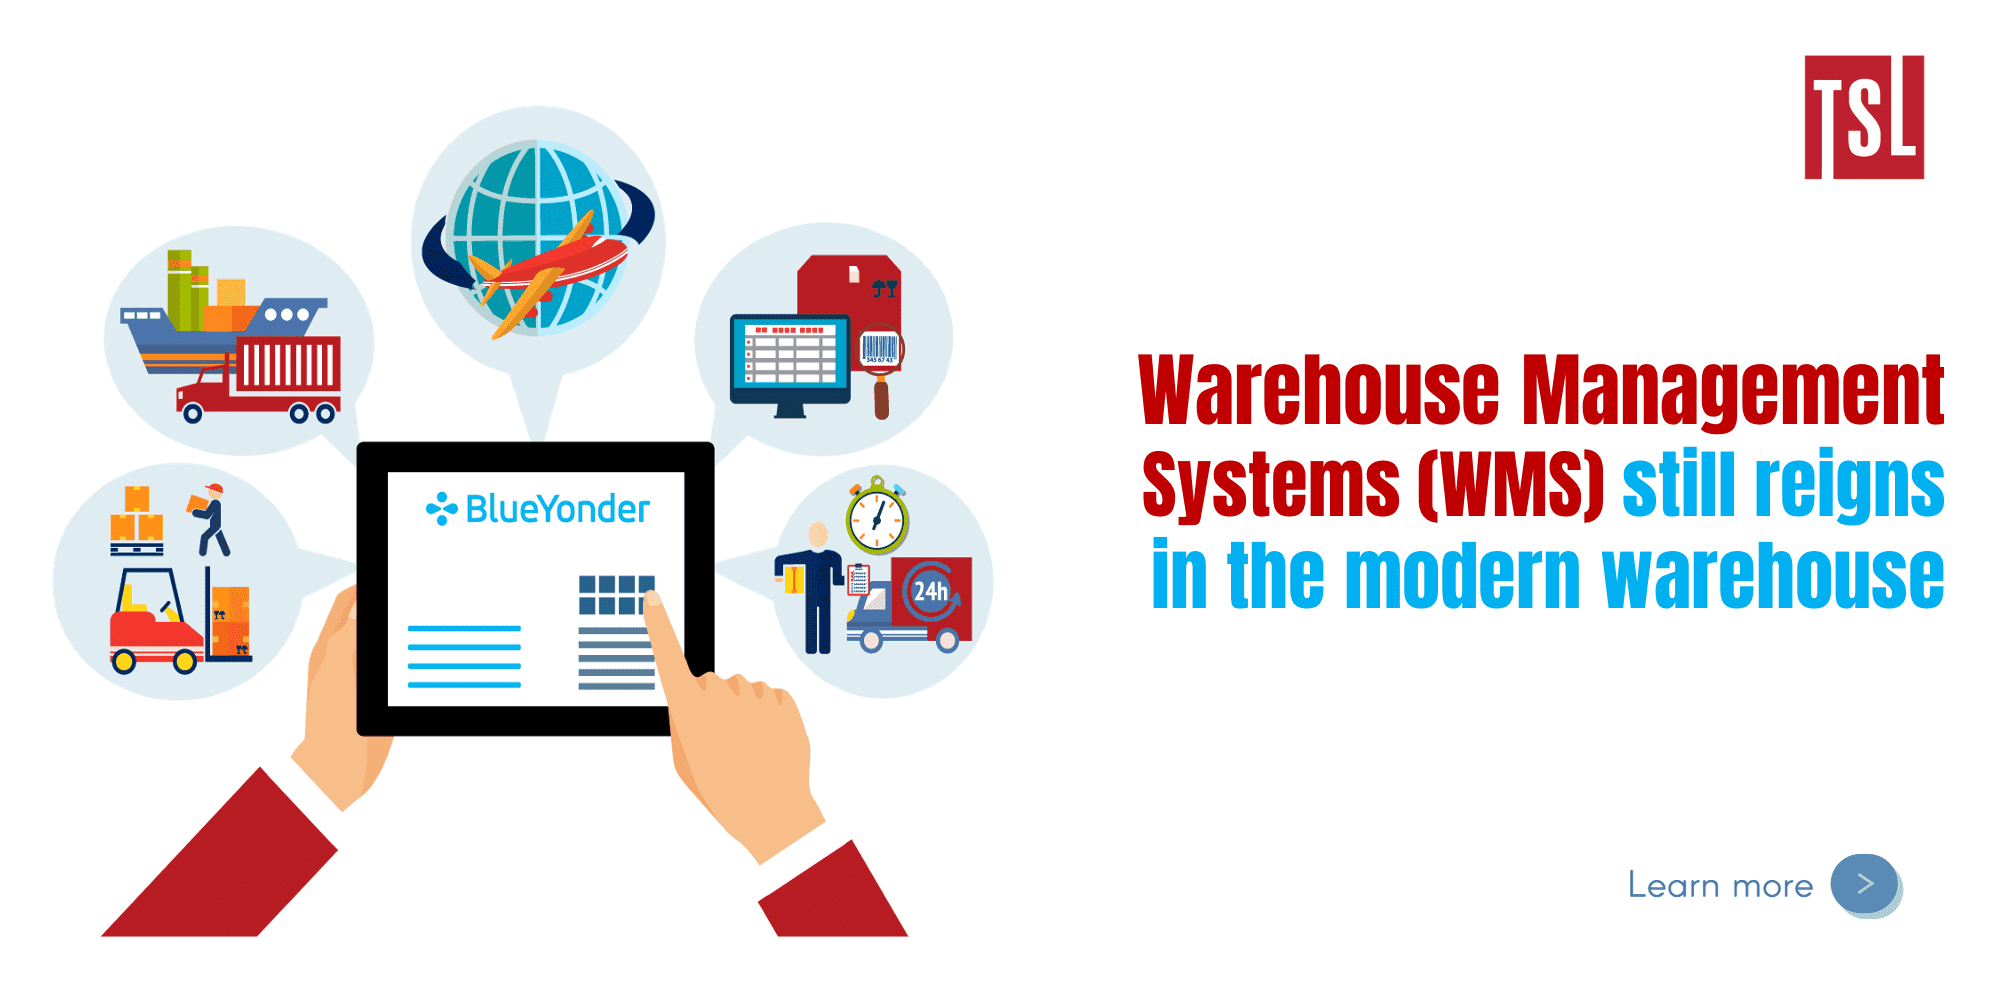 Warehouse Management Systems (WMS) still reigns in the modern warehouse